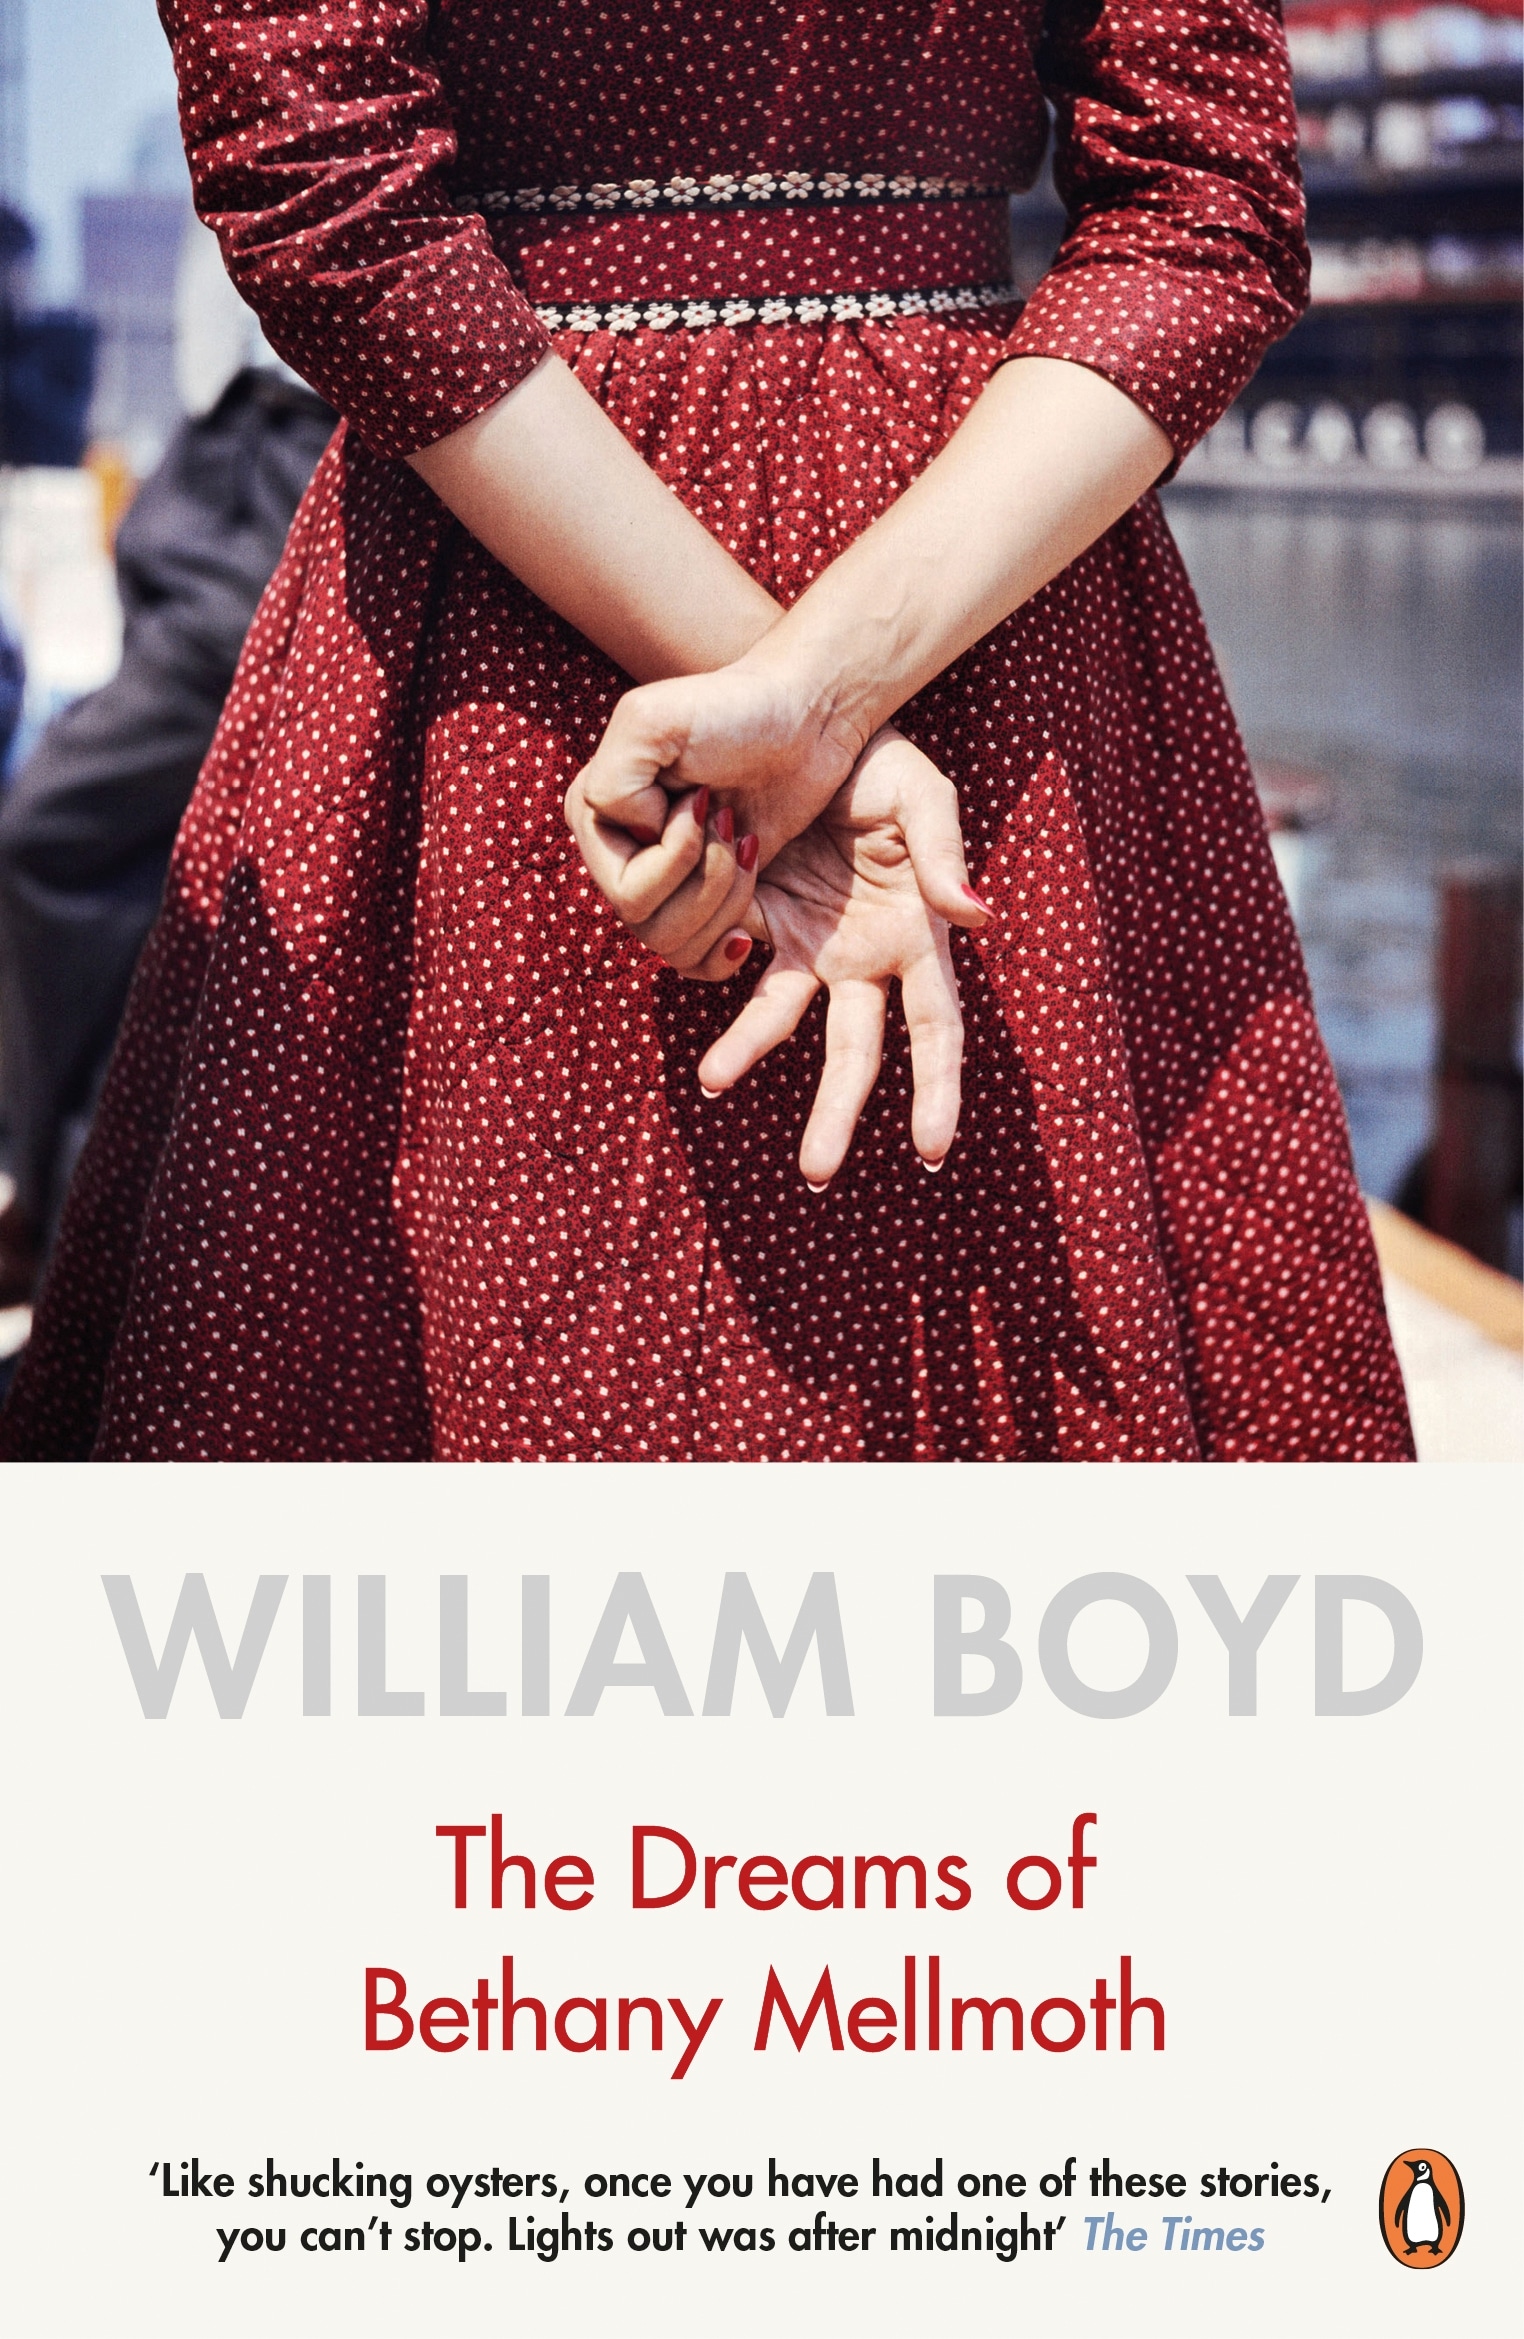 Book “The Dreams of Bethany Mellmoth” by William Boyd — June 7, 2018